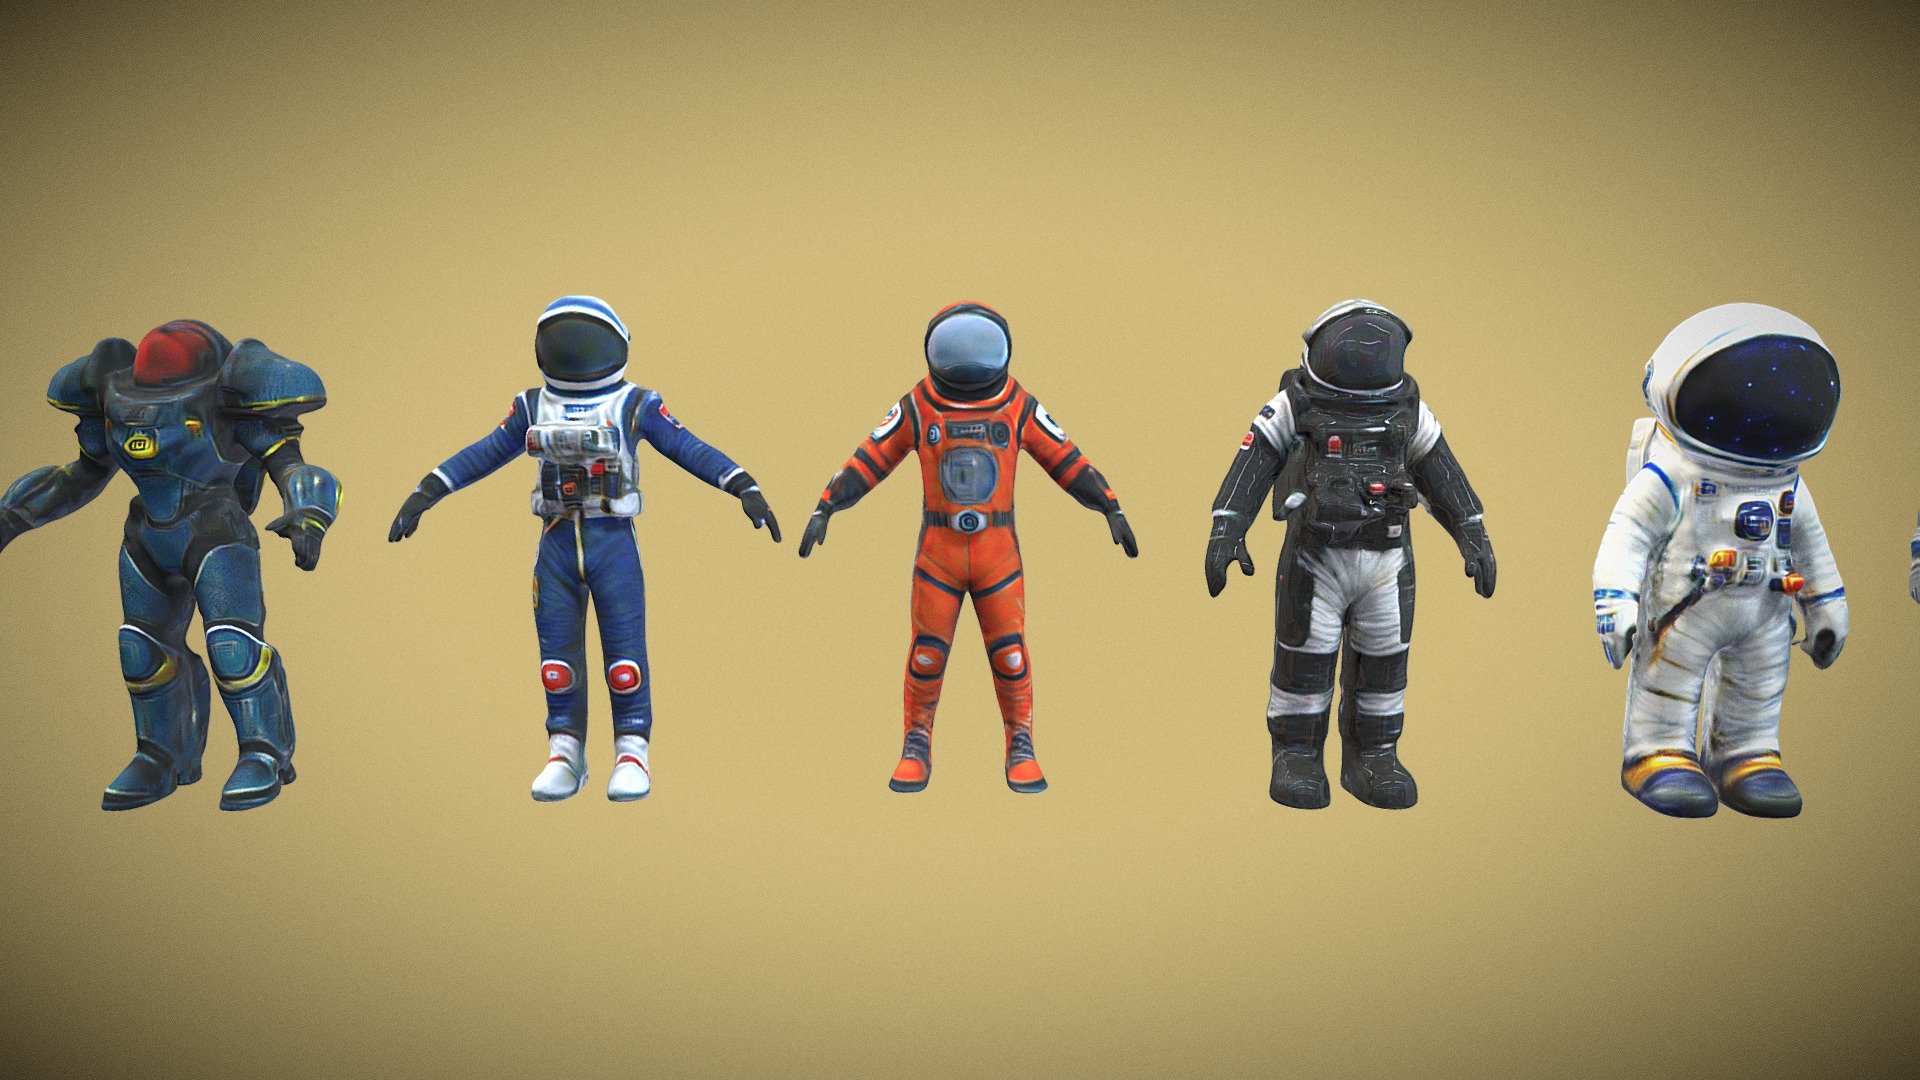 Some astronuts with suits 3d model